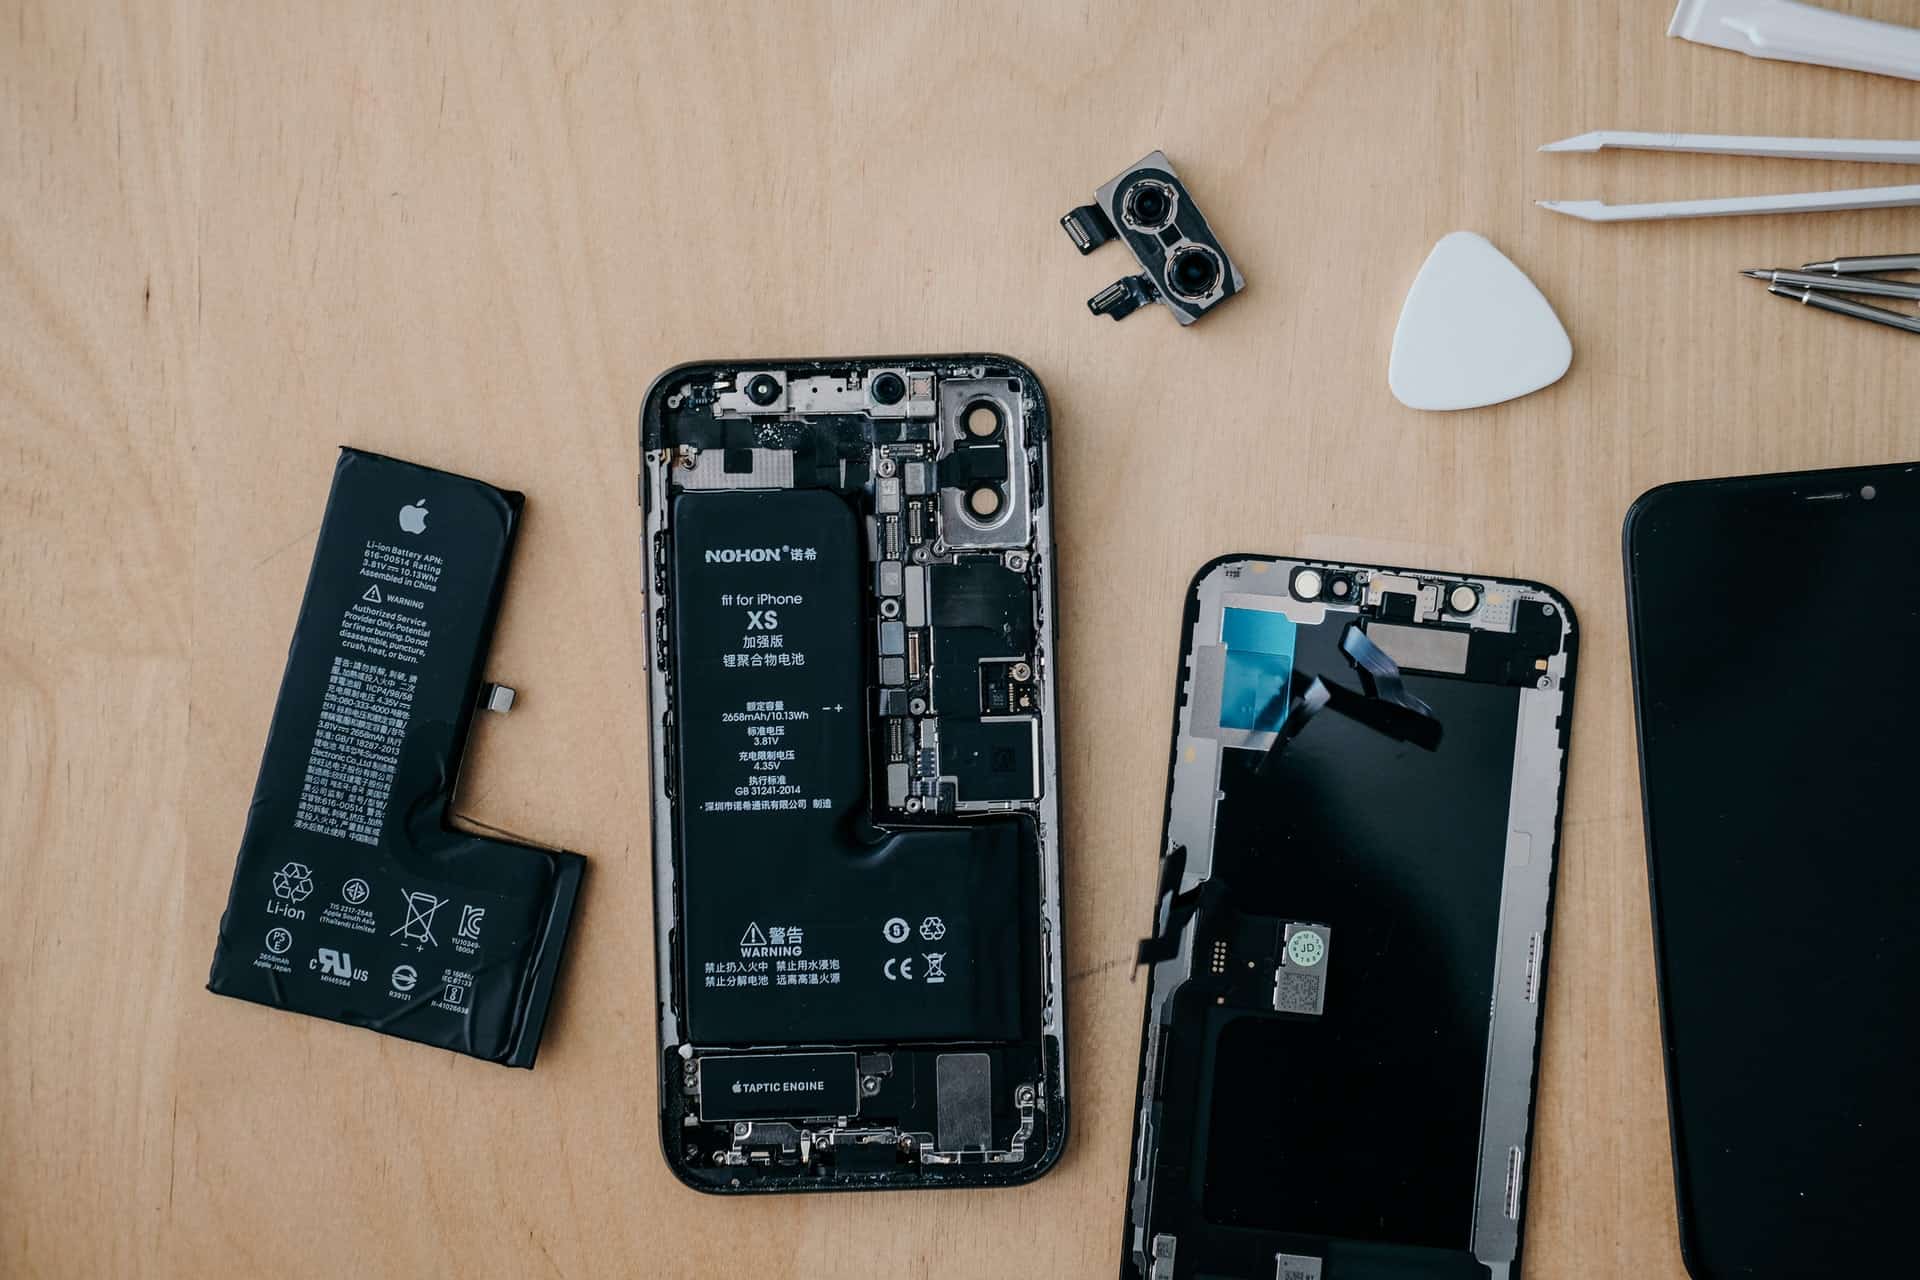 An iPhone that's been taken apart, showing the internal components